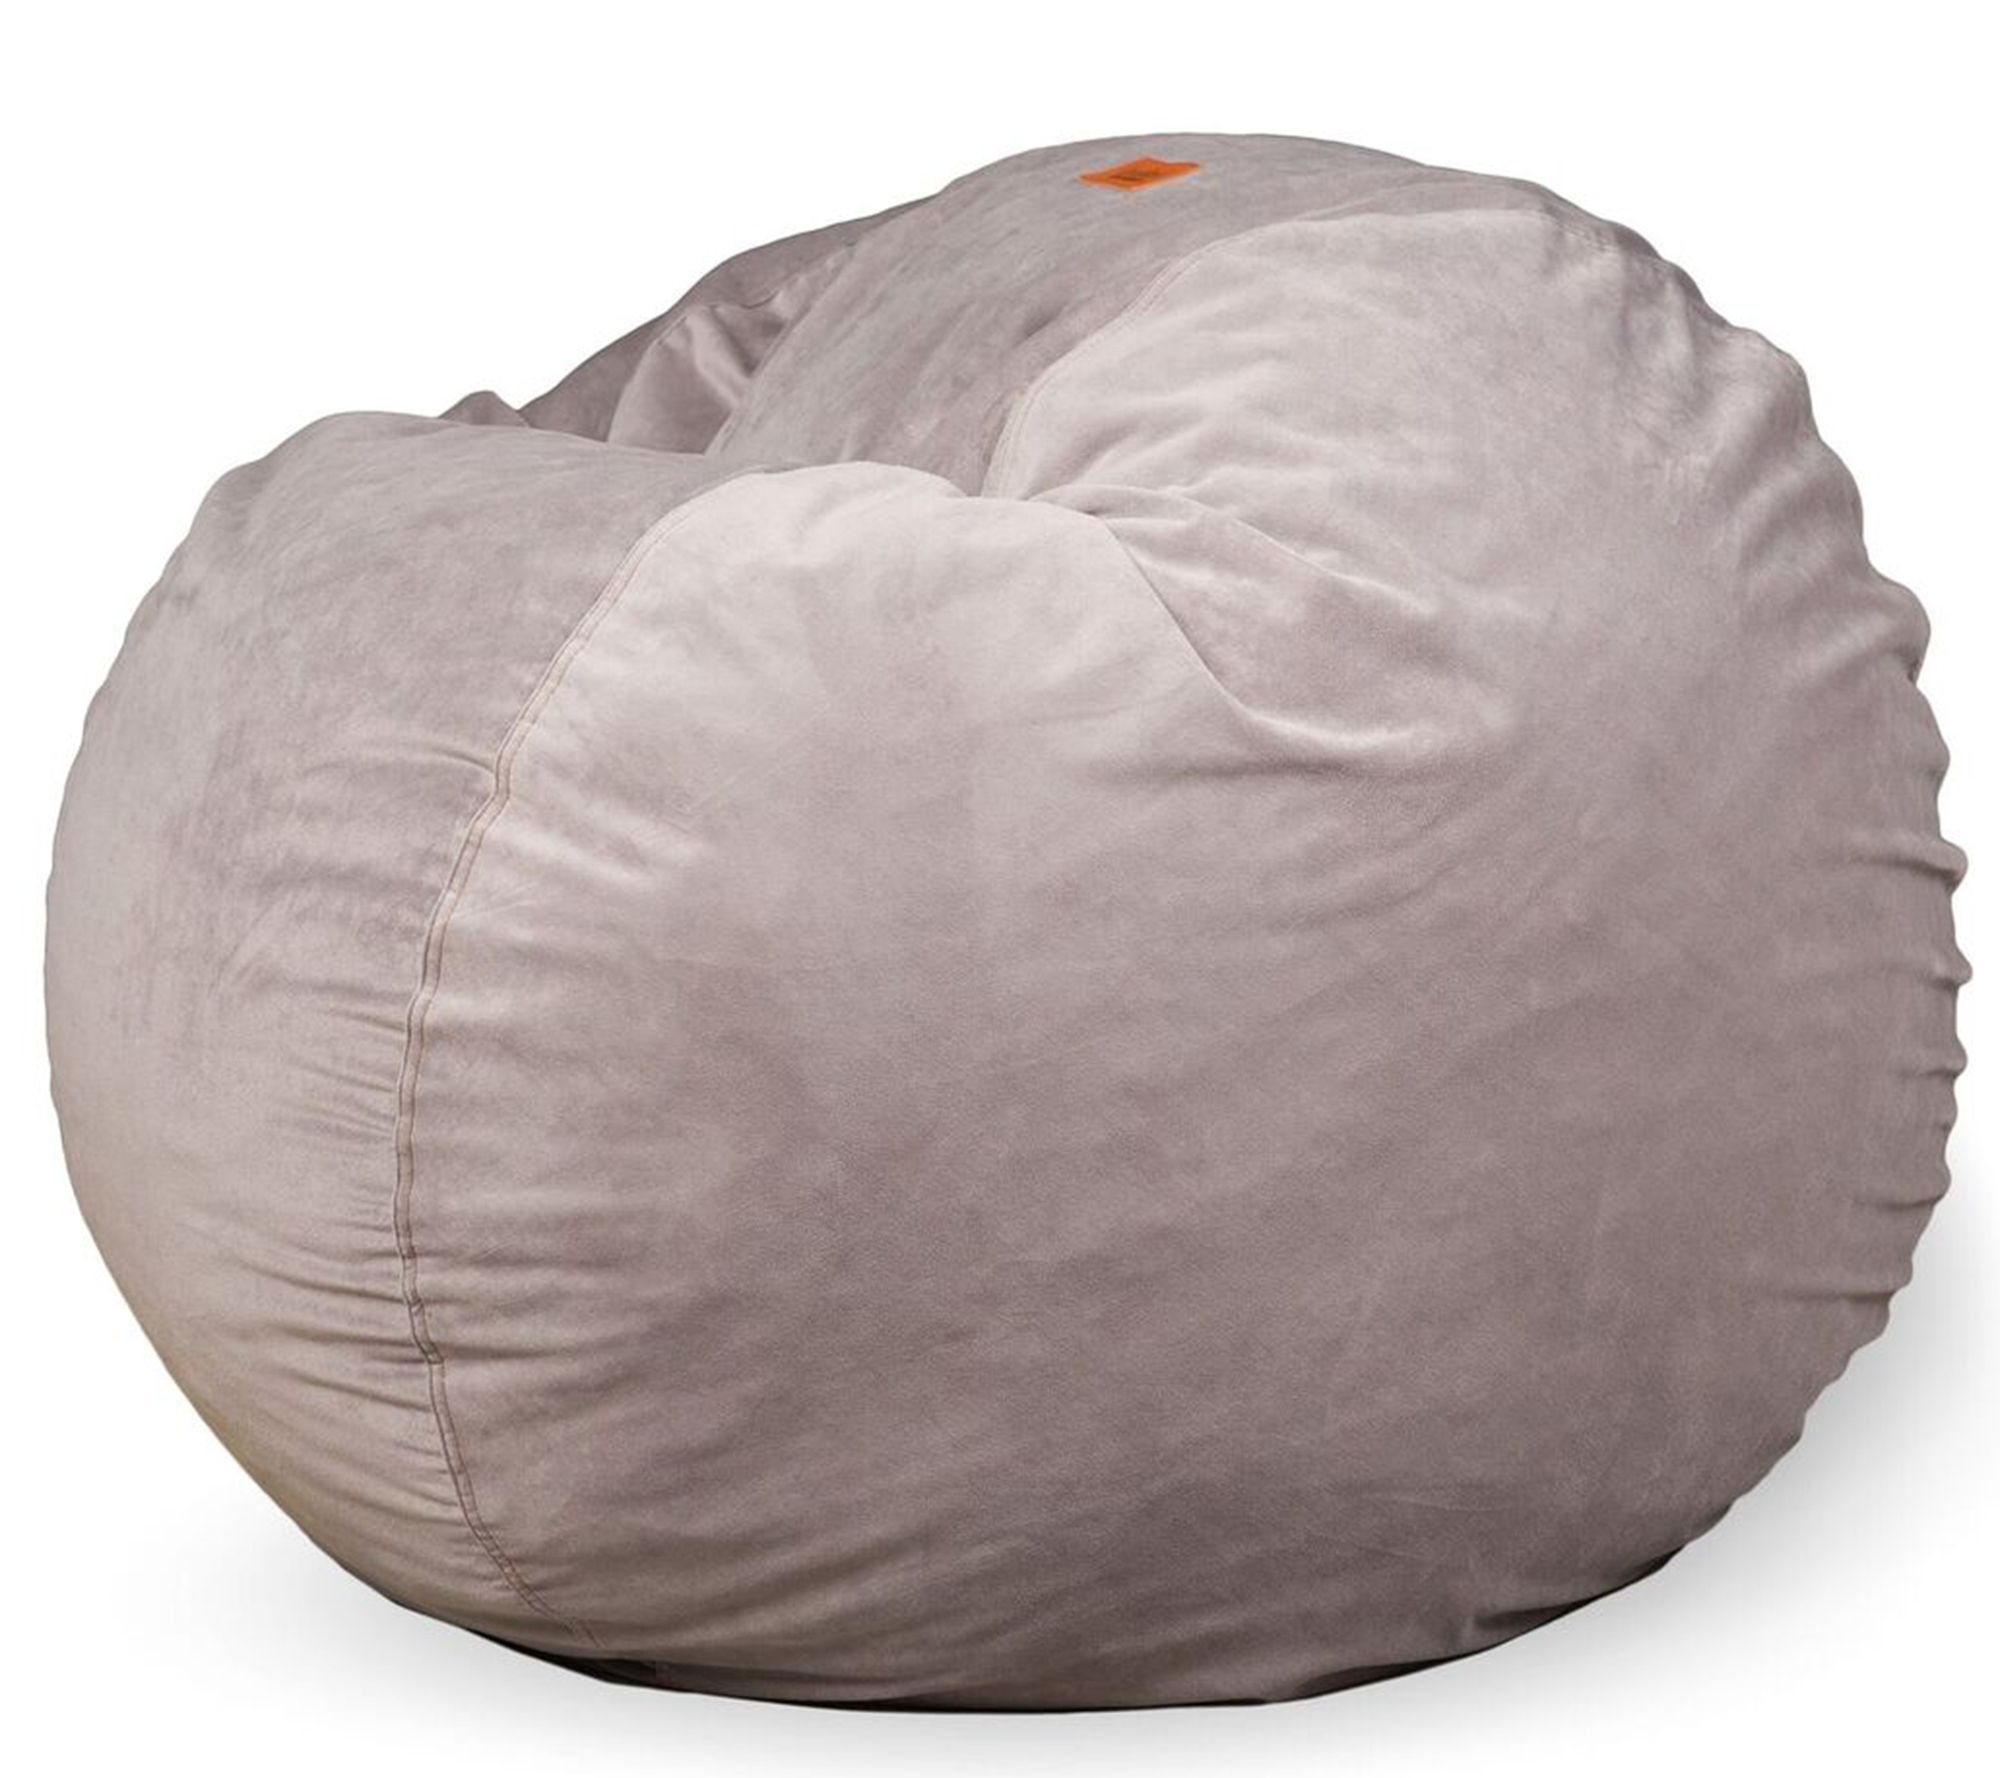 Cordaroy S Full Size Convertible Bean Bag Chair By Lori Greiner